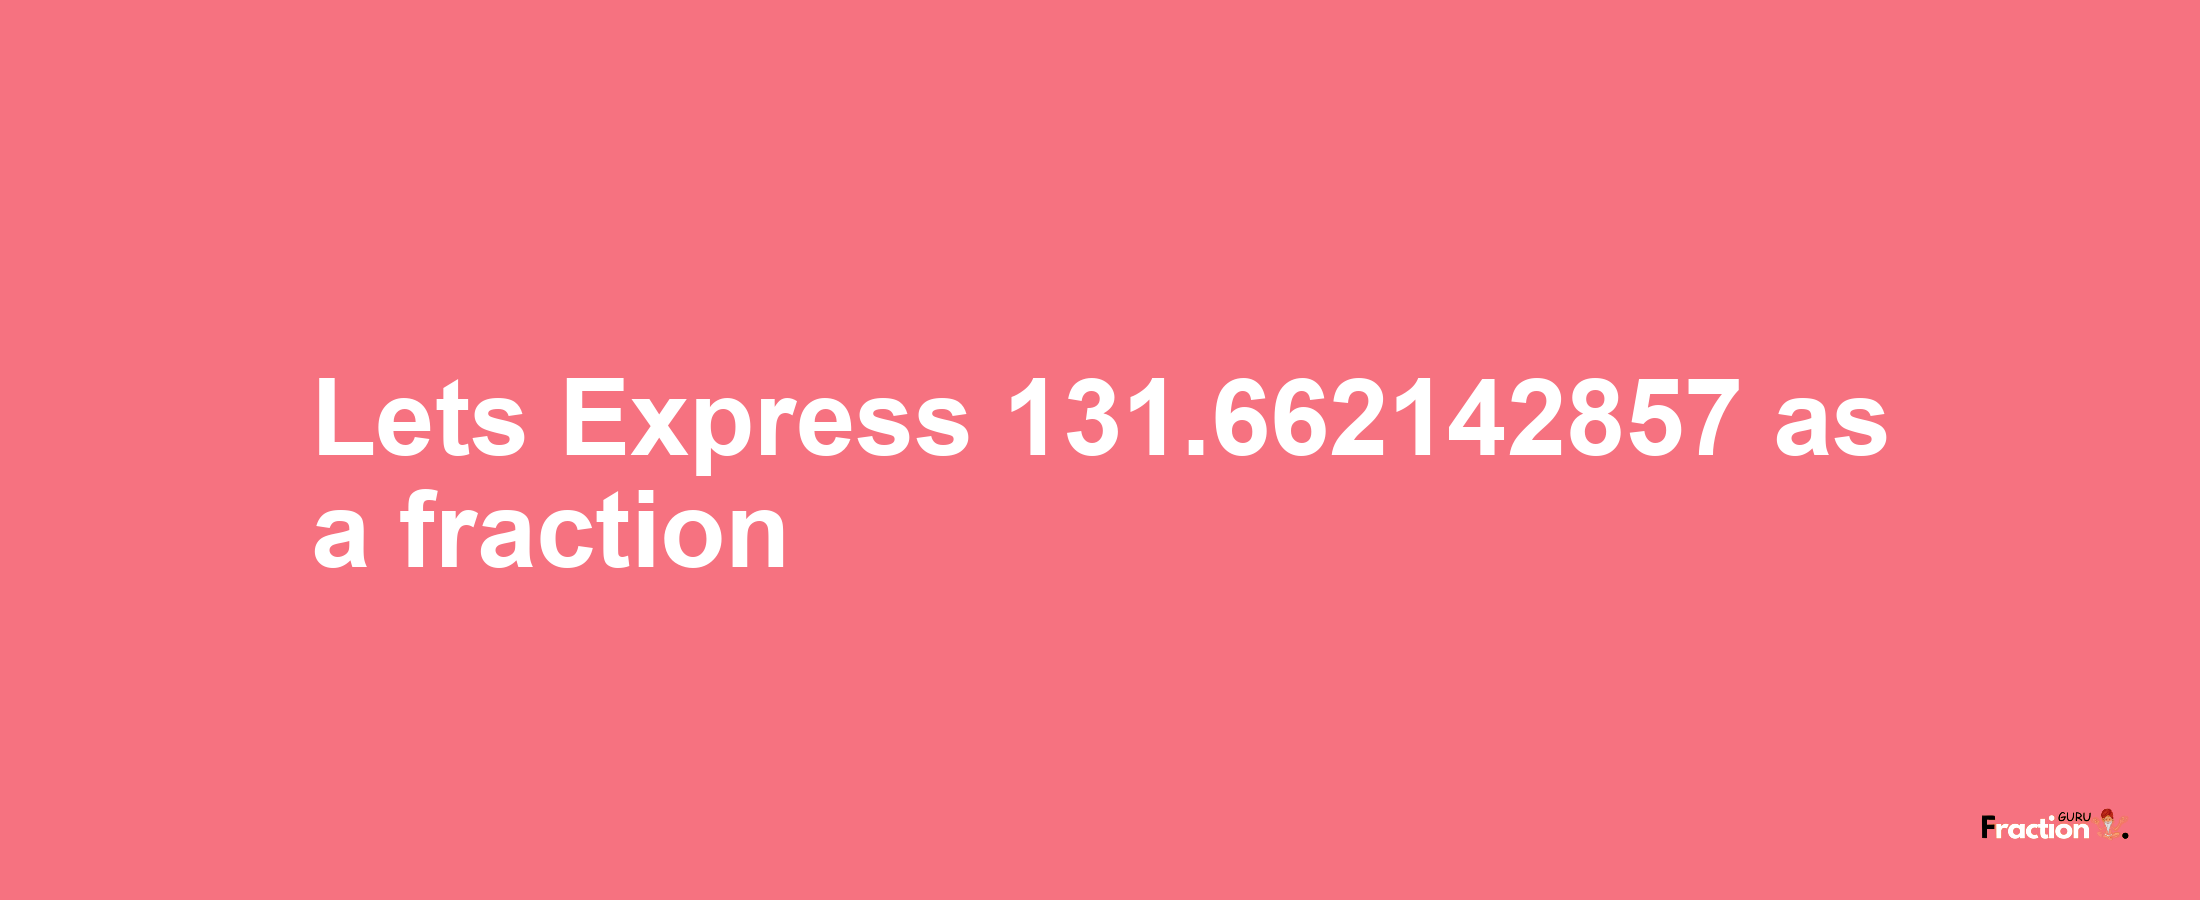 Lets Express 131.662142857 as afraction